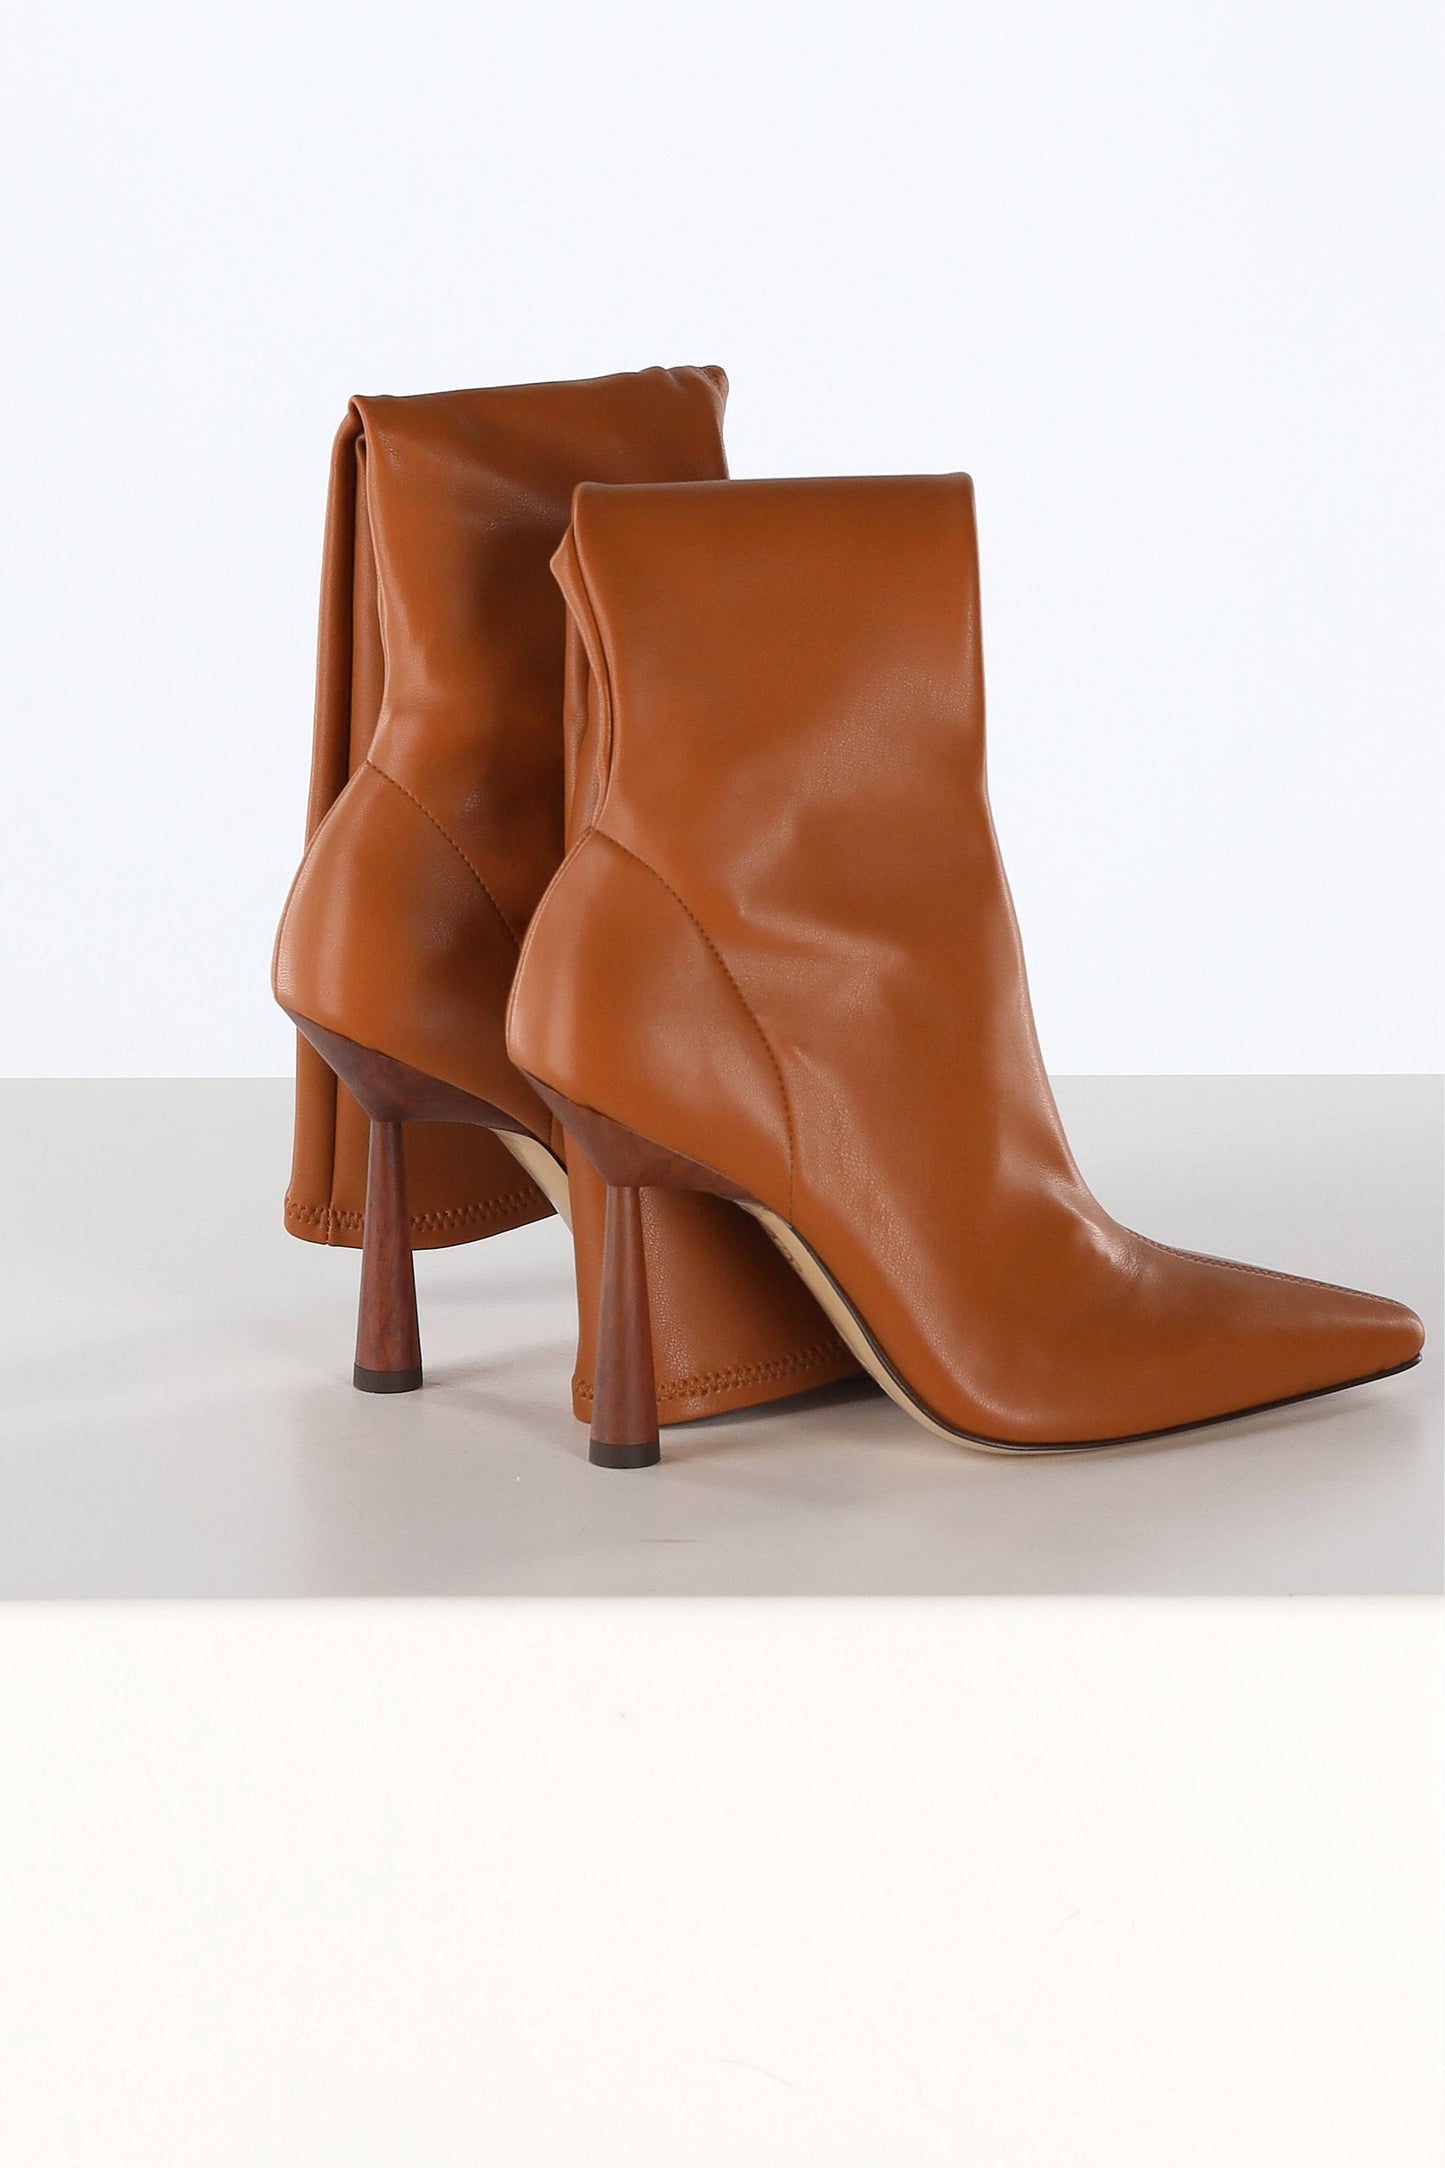 Stiefel Rosie 8 in Sudan BrownGia x RHW - Anita Hass